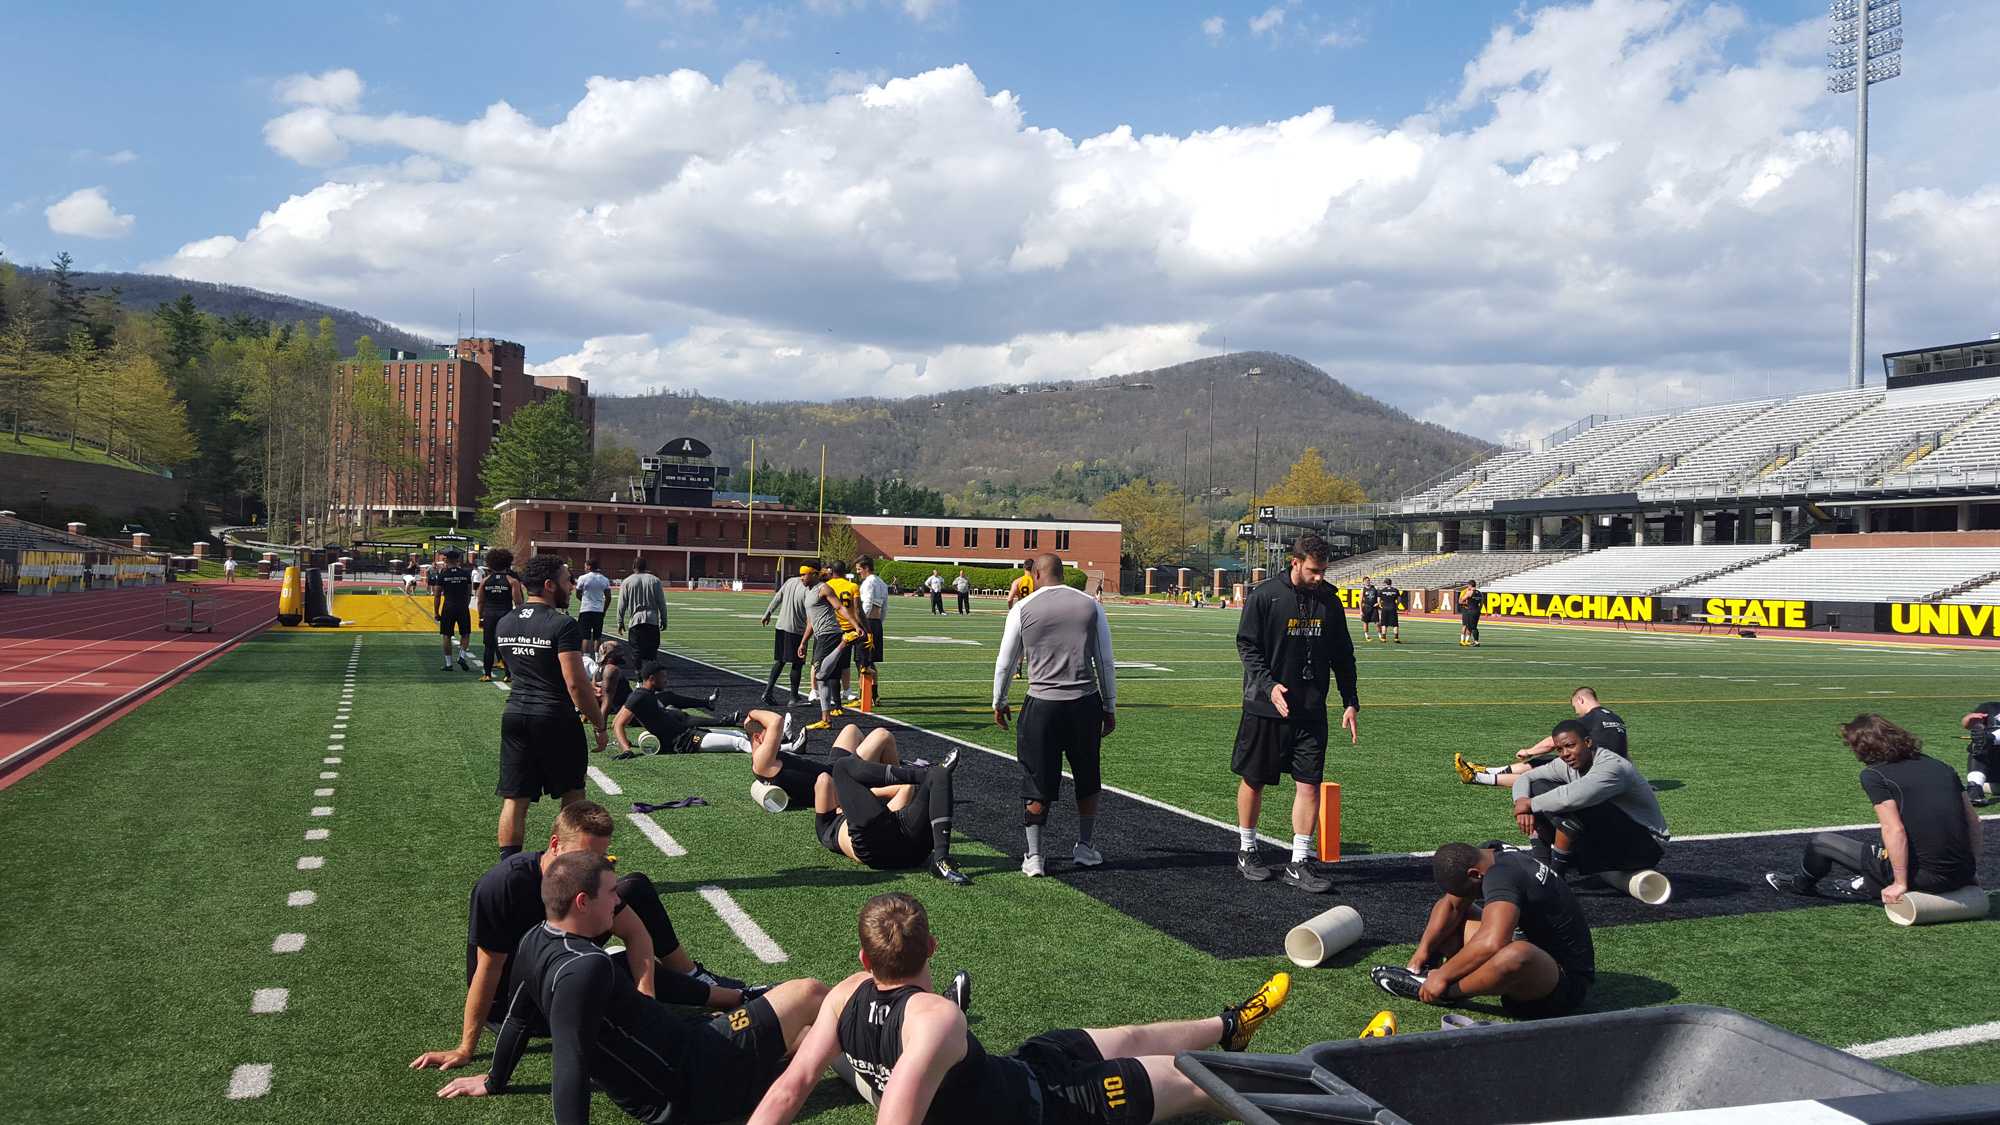 Members+of+the+football+team+stretching+before+practice.+Photo+by+Nick+Joyner